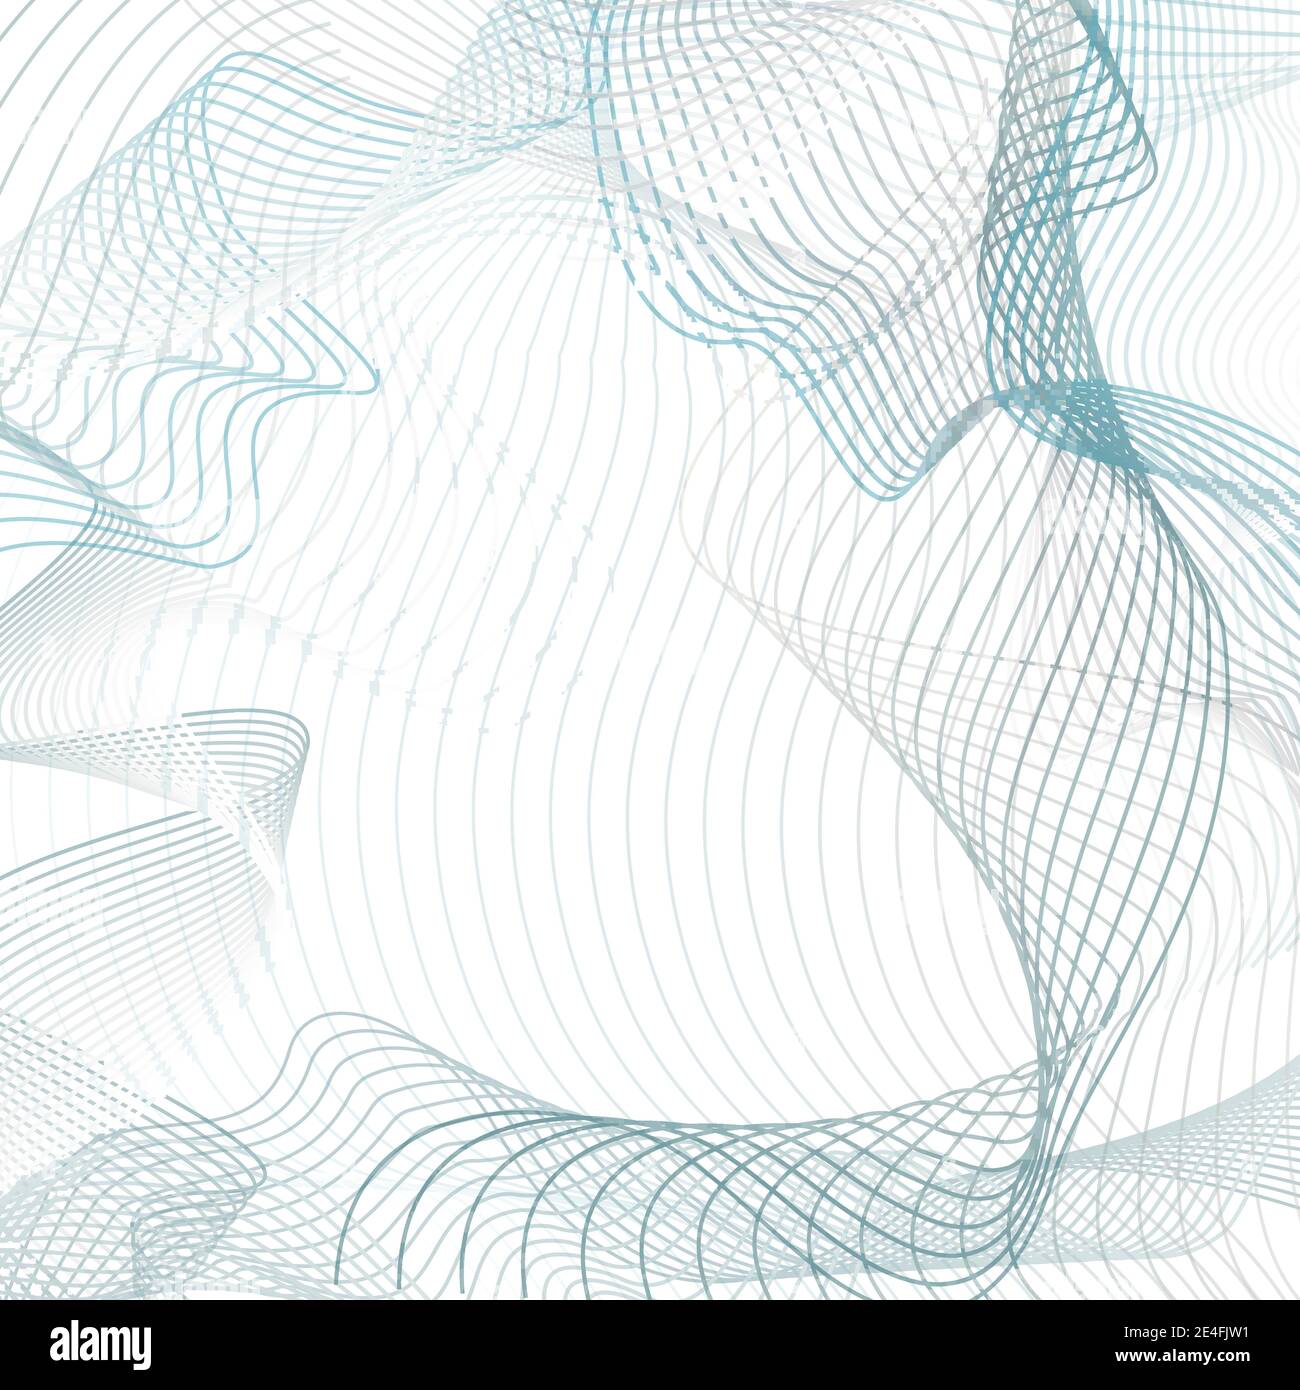 Abstract waves concept. Vector background. Line art futuristic design, chaotic squiggles. Industrial pattern in teal, gray. Tech subtle curves. EPS10 Stock Vector